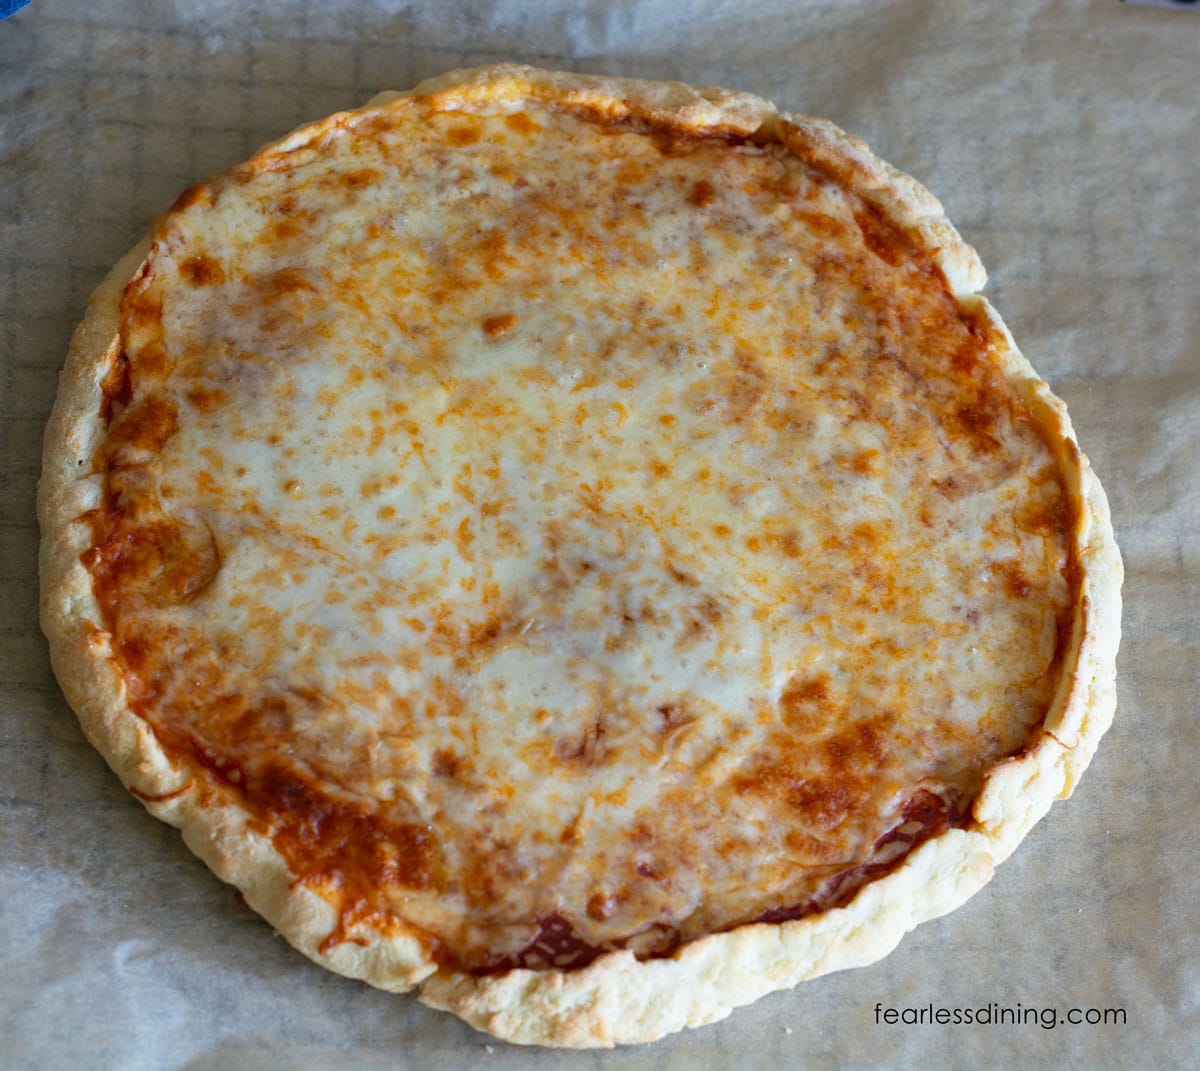 A photo of the whole gluten-free, yeast-free pizza made with Cup4Cup flour blend.